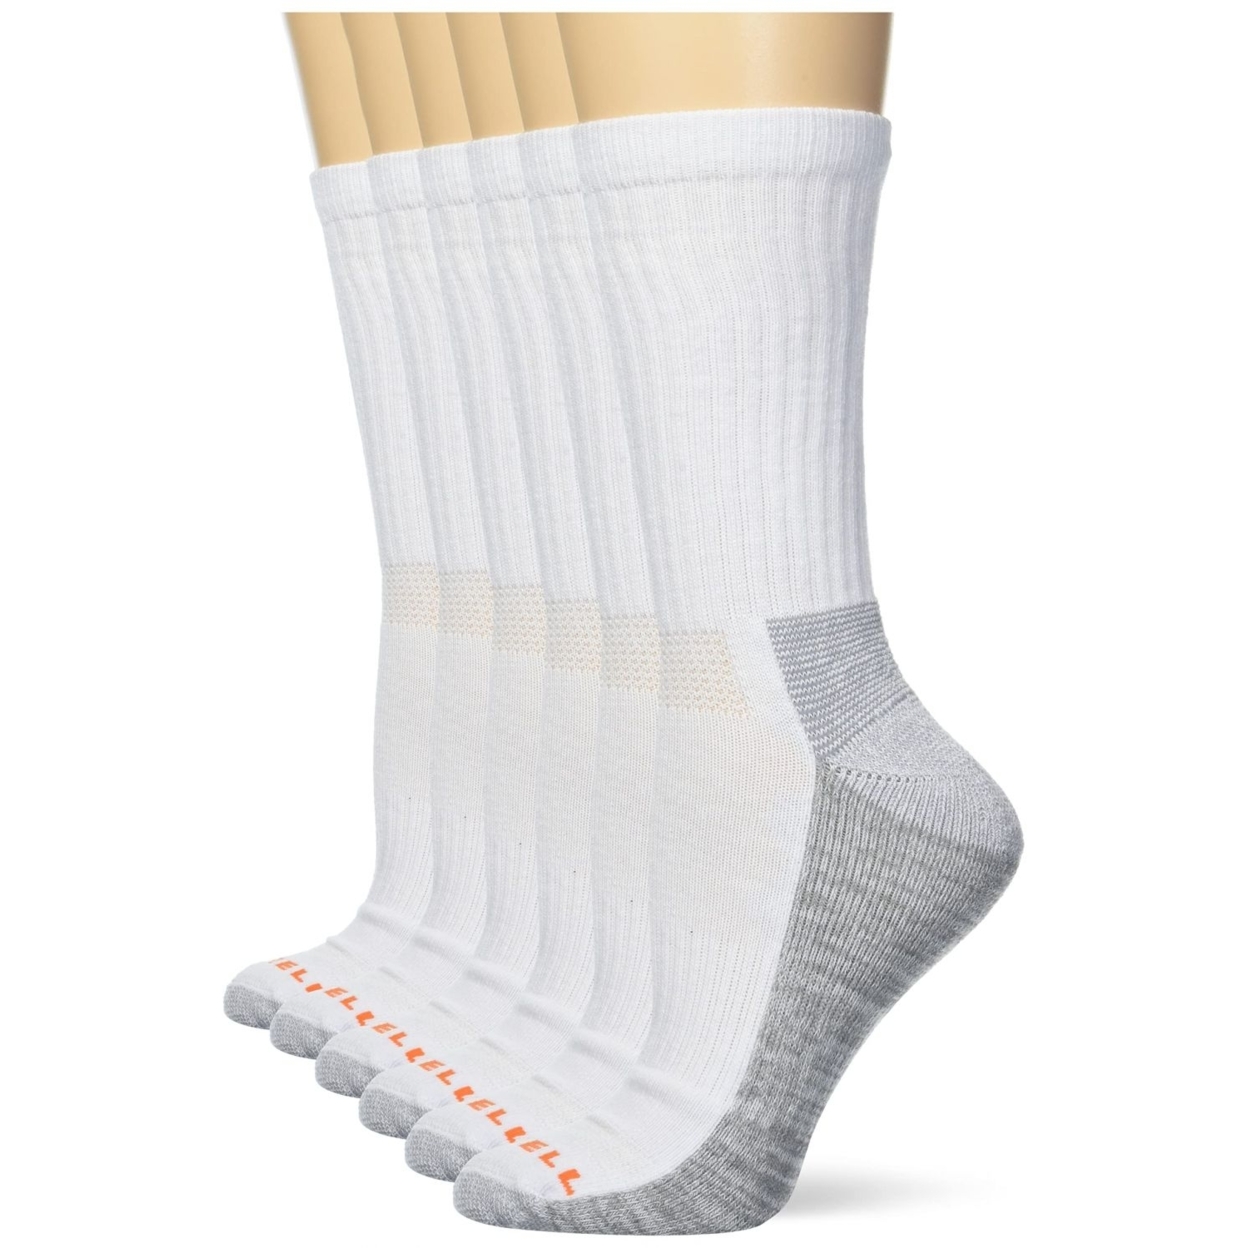 Merrell Men's And Women's Durable Everyday Work Crew Socks - Unisex 6 Pair Pack - Arch Support And Anti-Odor Cotton WHITE - WHITE, Medium-La